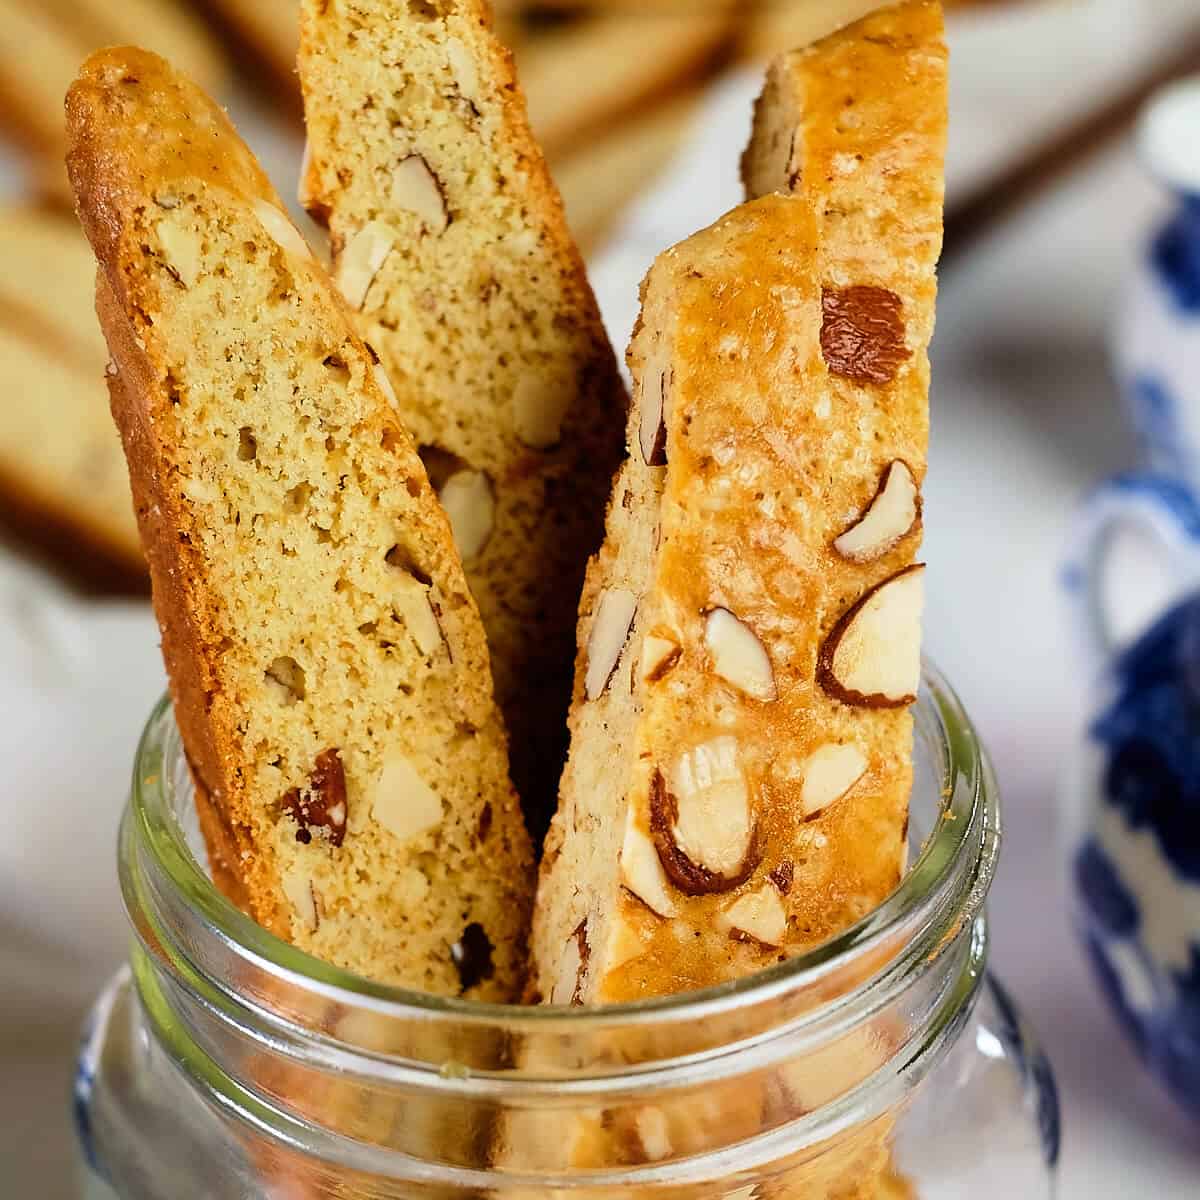 https://www.thedeliciouscrescent.com/wp-content/uploads/2016/04/Almond-Biscotti-5.jpg